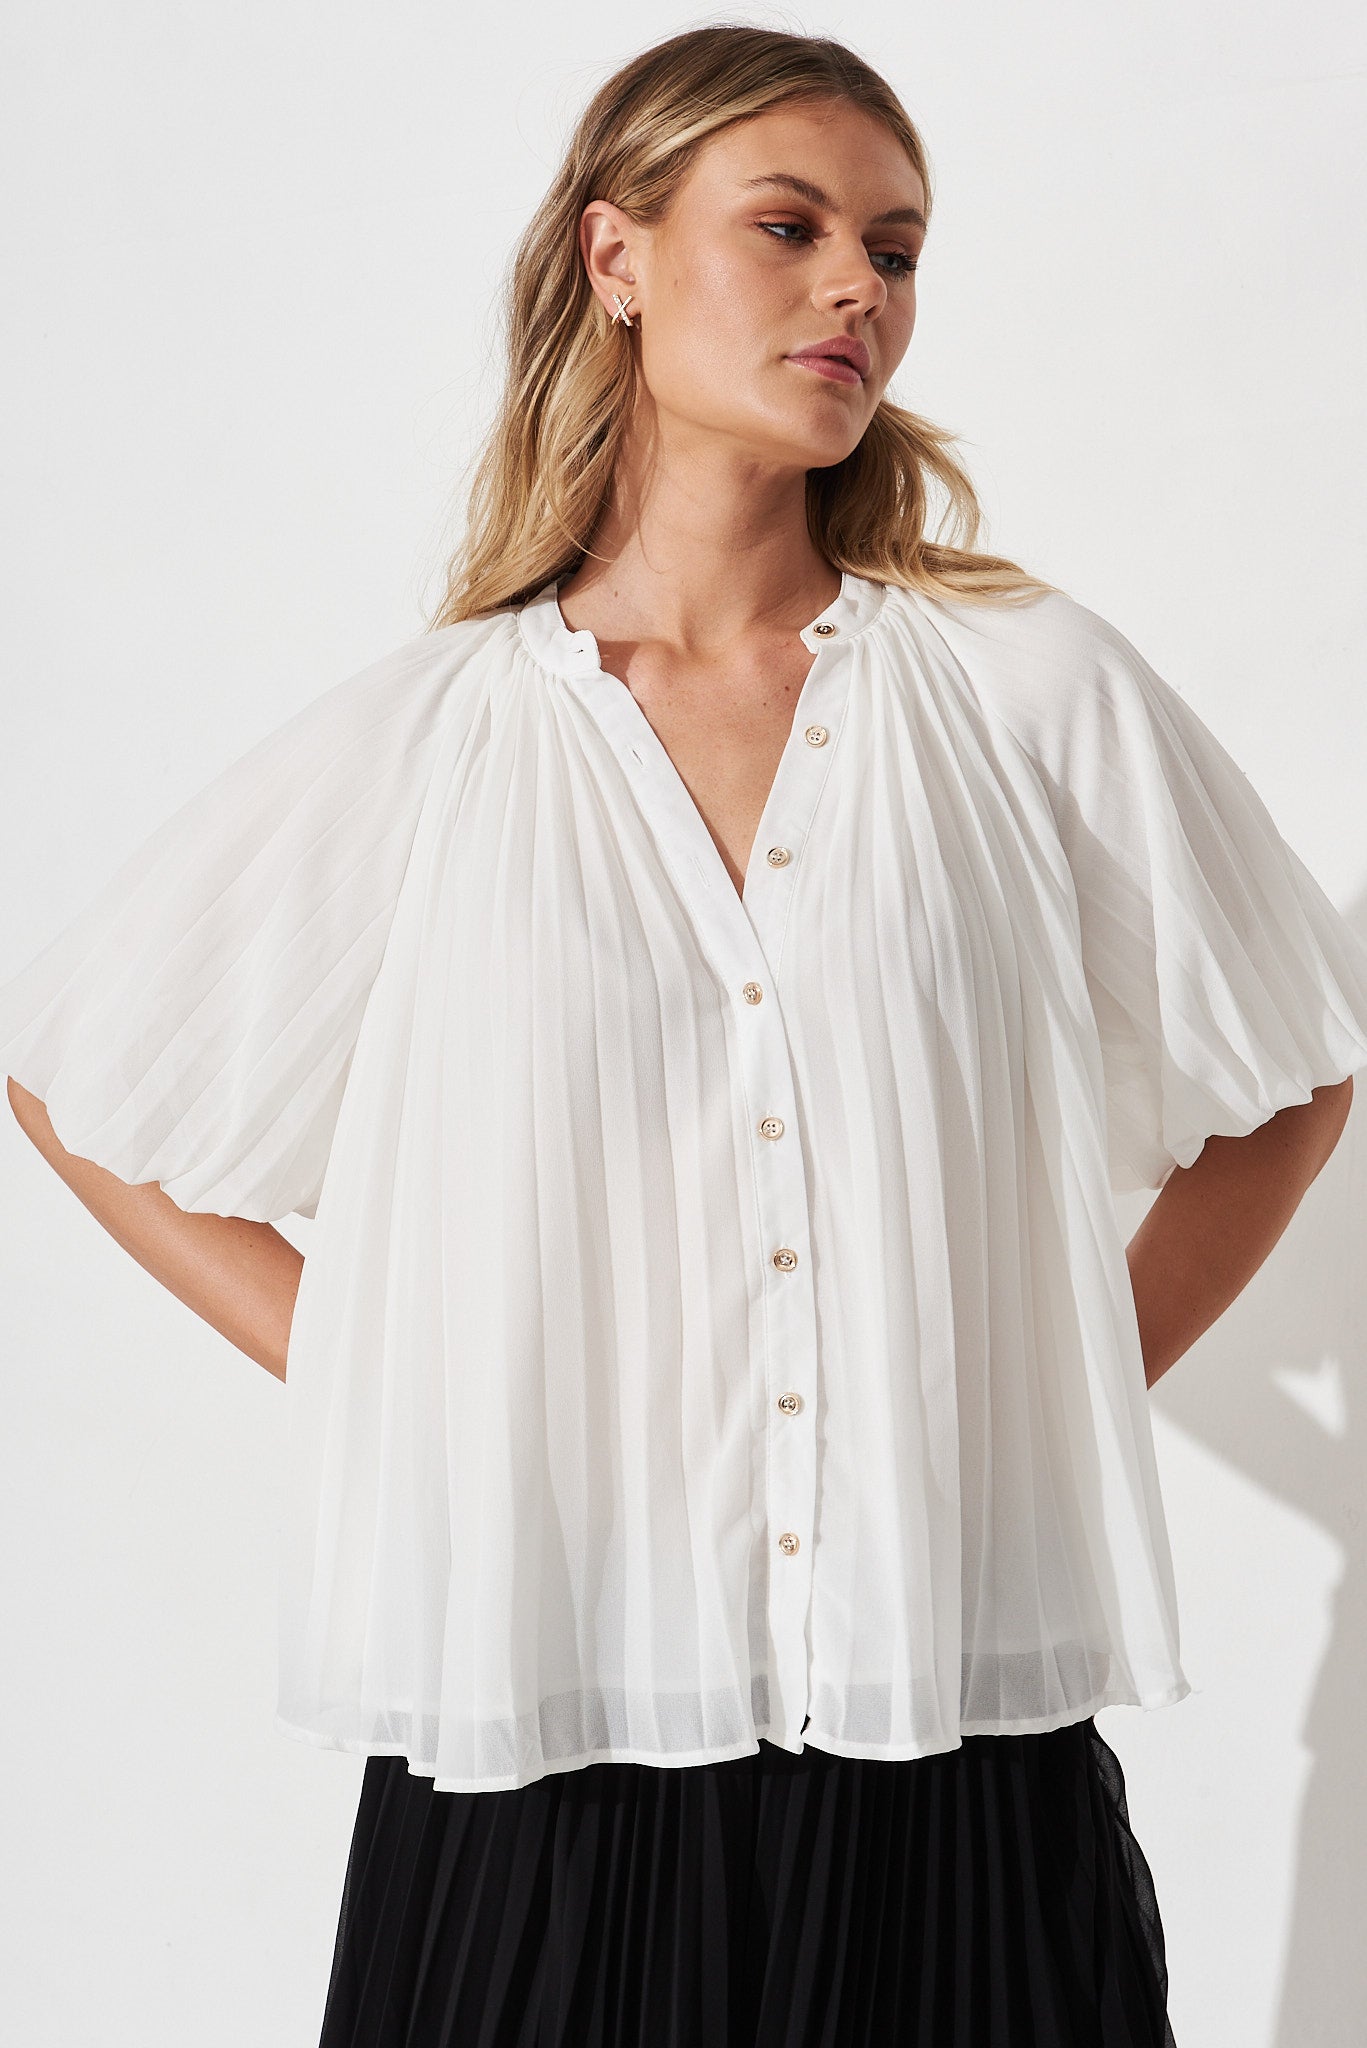 Chariste Shirt In White - Front